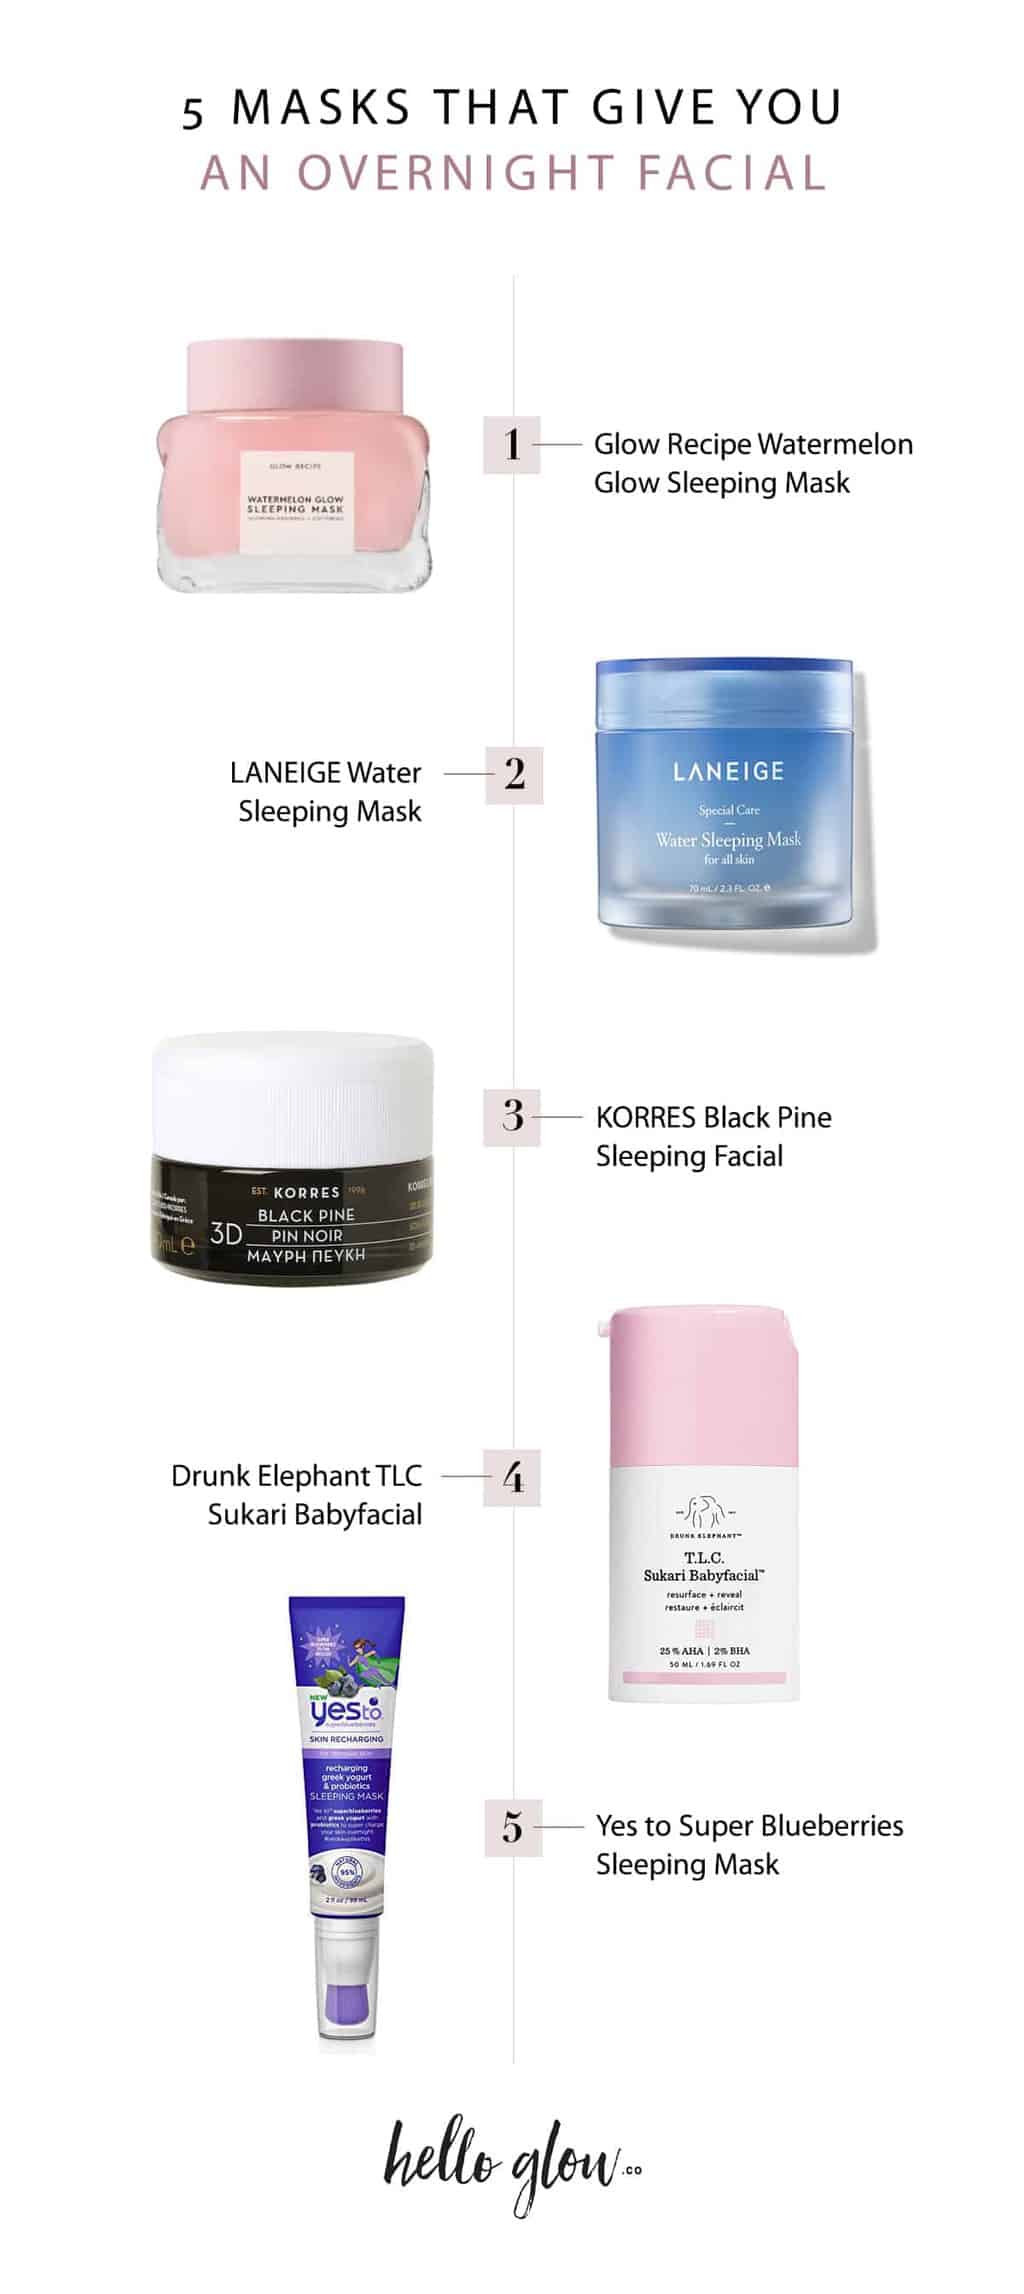 5 Sleeping Masks That Give You an Overnight Facial